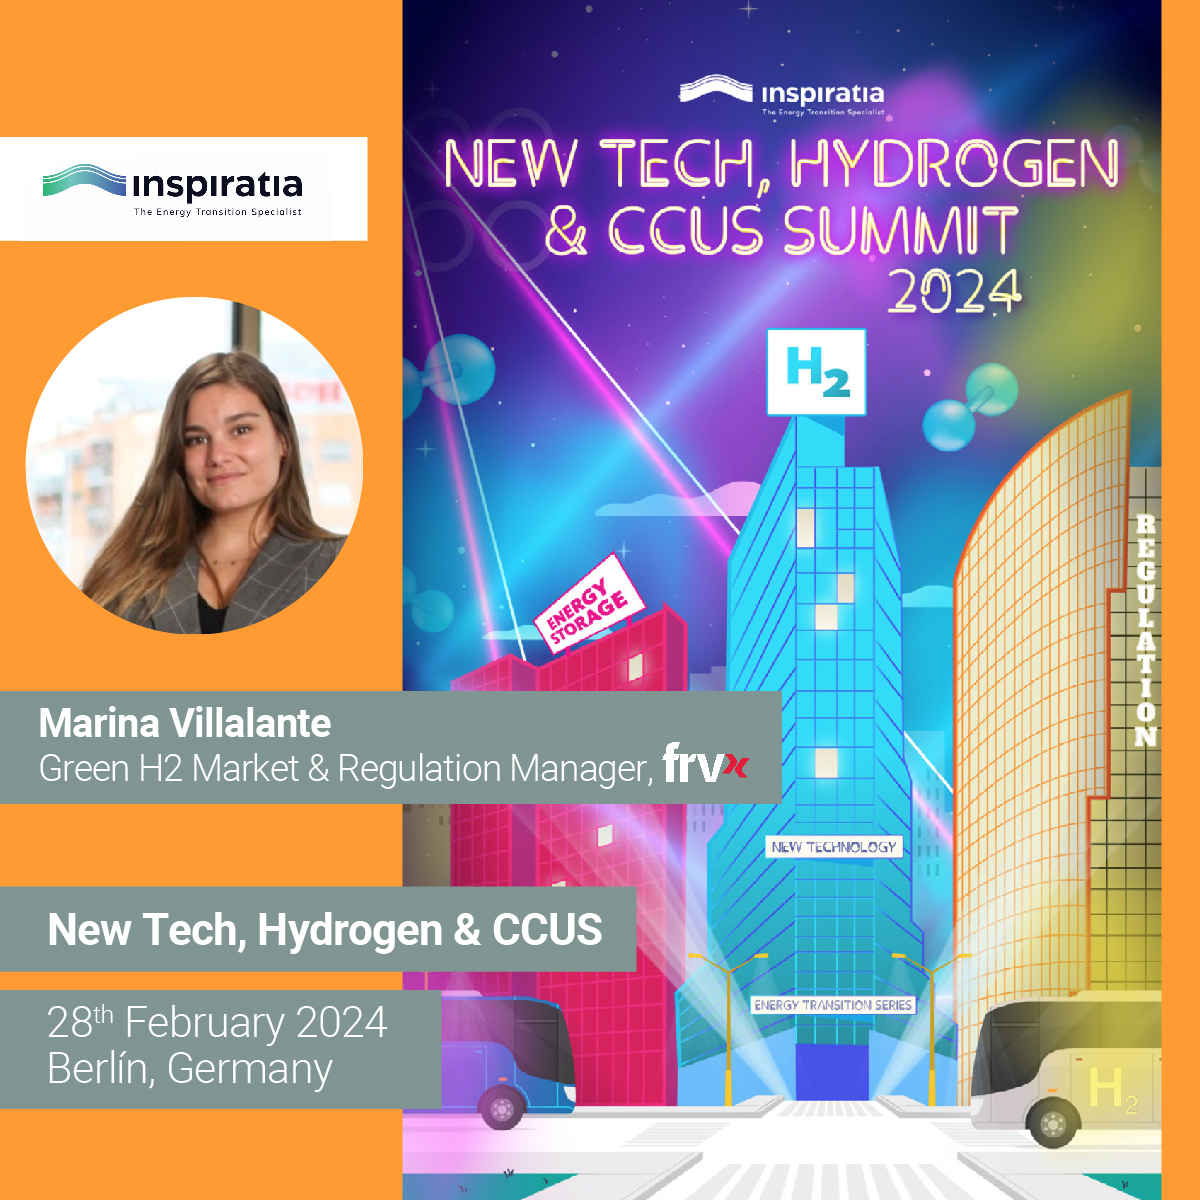 🗓️🇩🇪 Tomorrow, the New Tech, #Hydrogen and CCUS Summit arrives in Berlin!

🗣️ Marina Villalante, Green H2 Regulation Manager at FRV-X, will be the voice of #FRV. She will explore the crucial industry issues to create a more sustainable future. 🌏

🫵 See you there! 

#FRVProjects